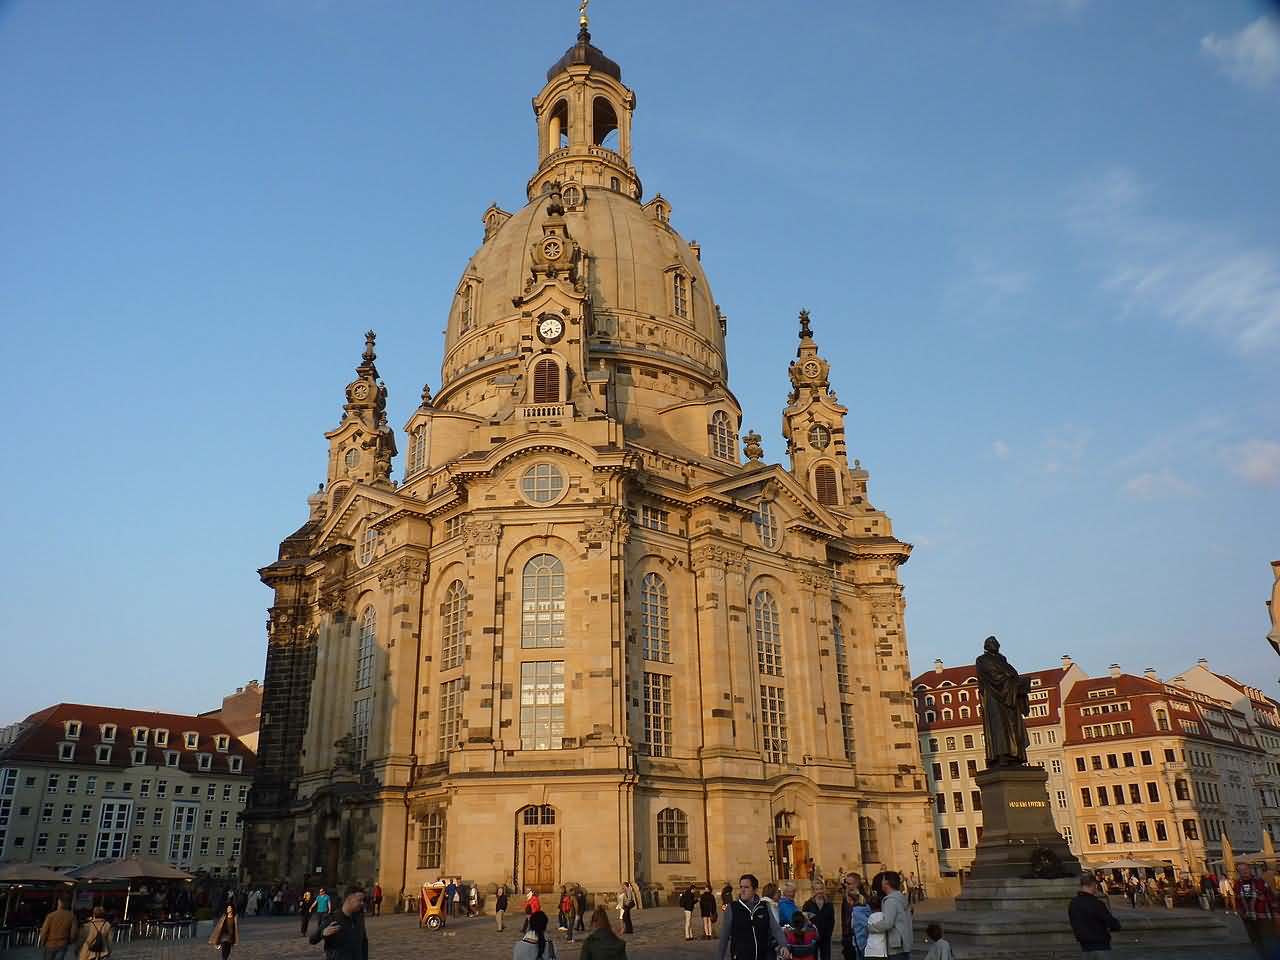 Day time view of the Dresden Frauenkirche in dresden, germany